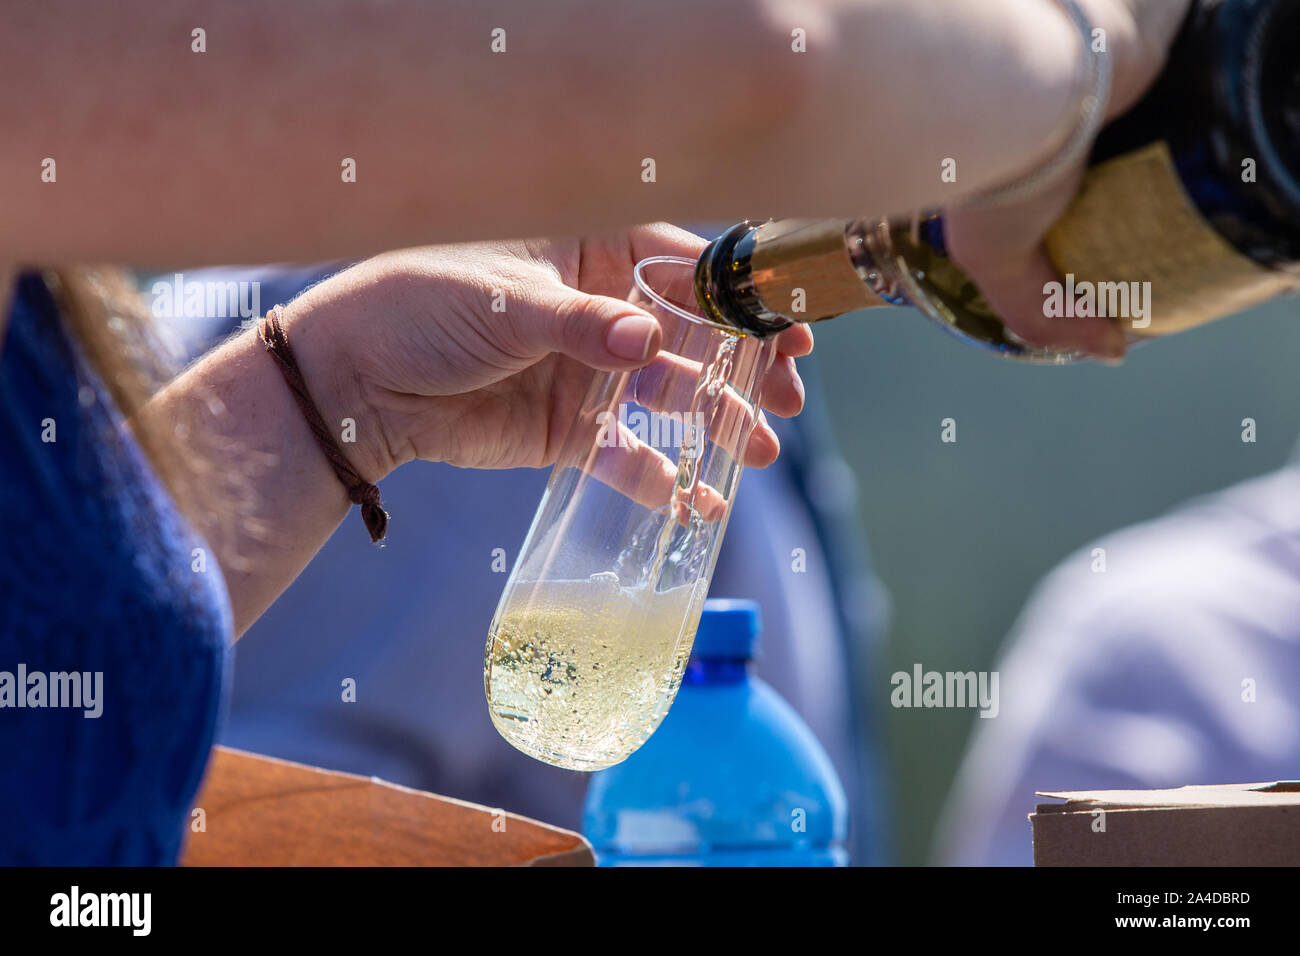 Woman pouring champagne into glass at a garden party Stock Photo